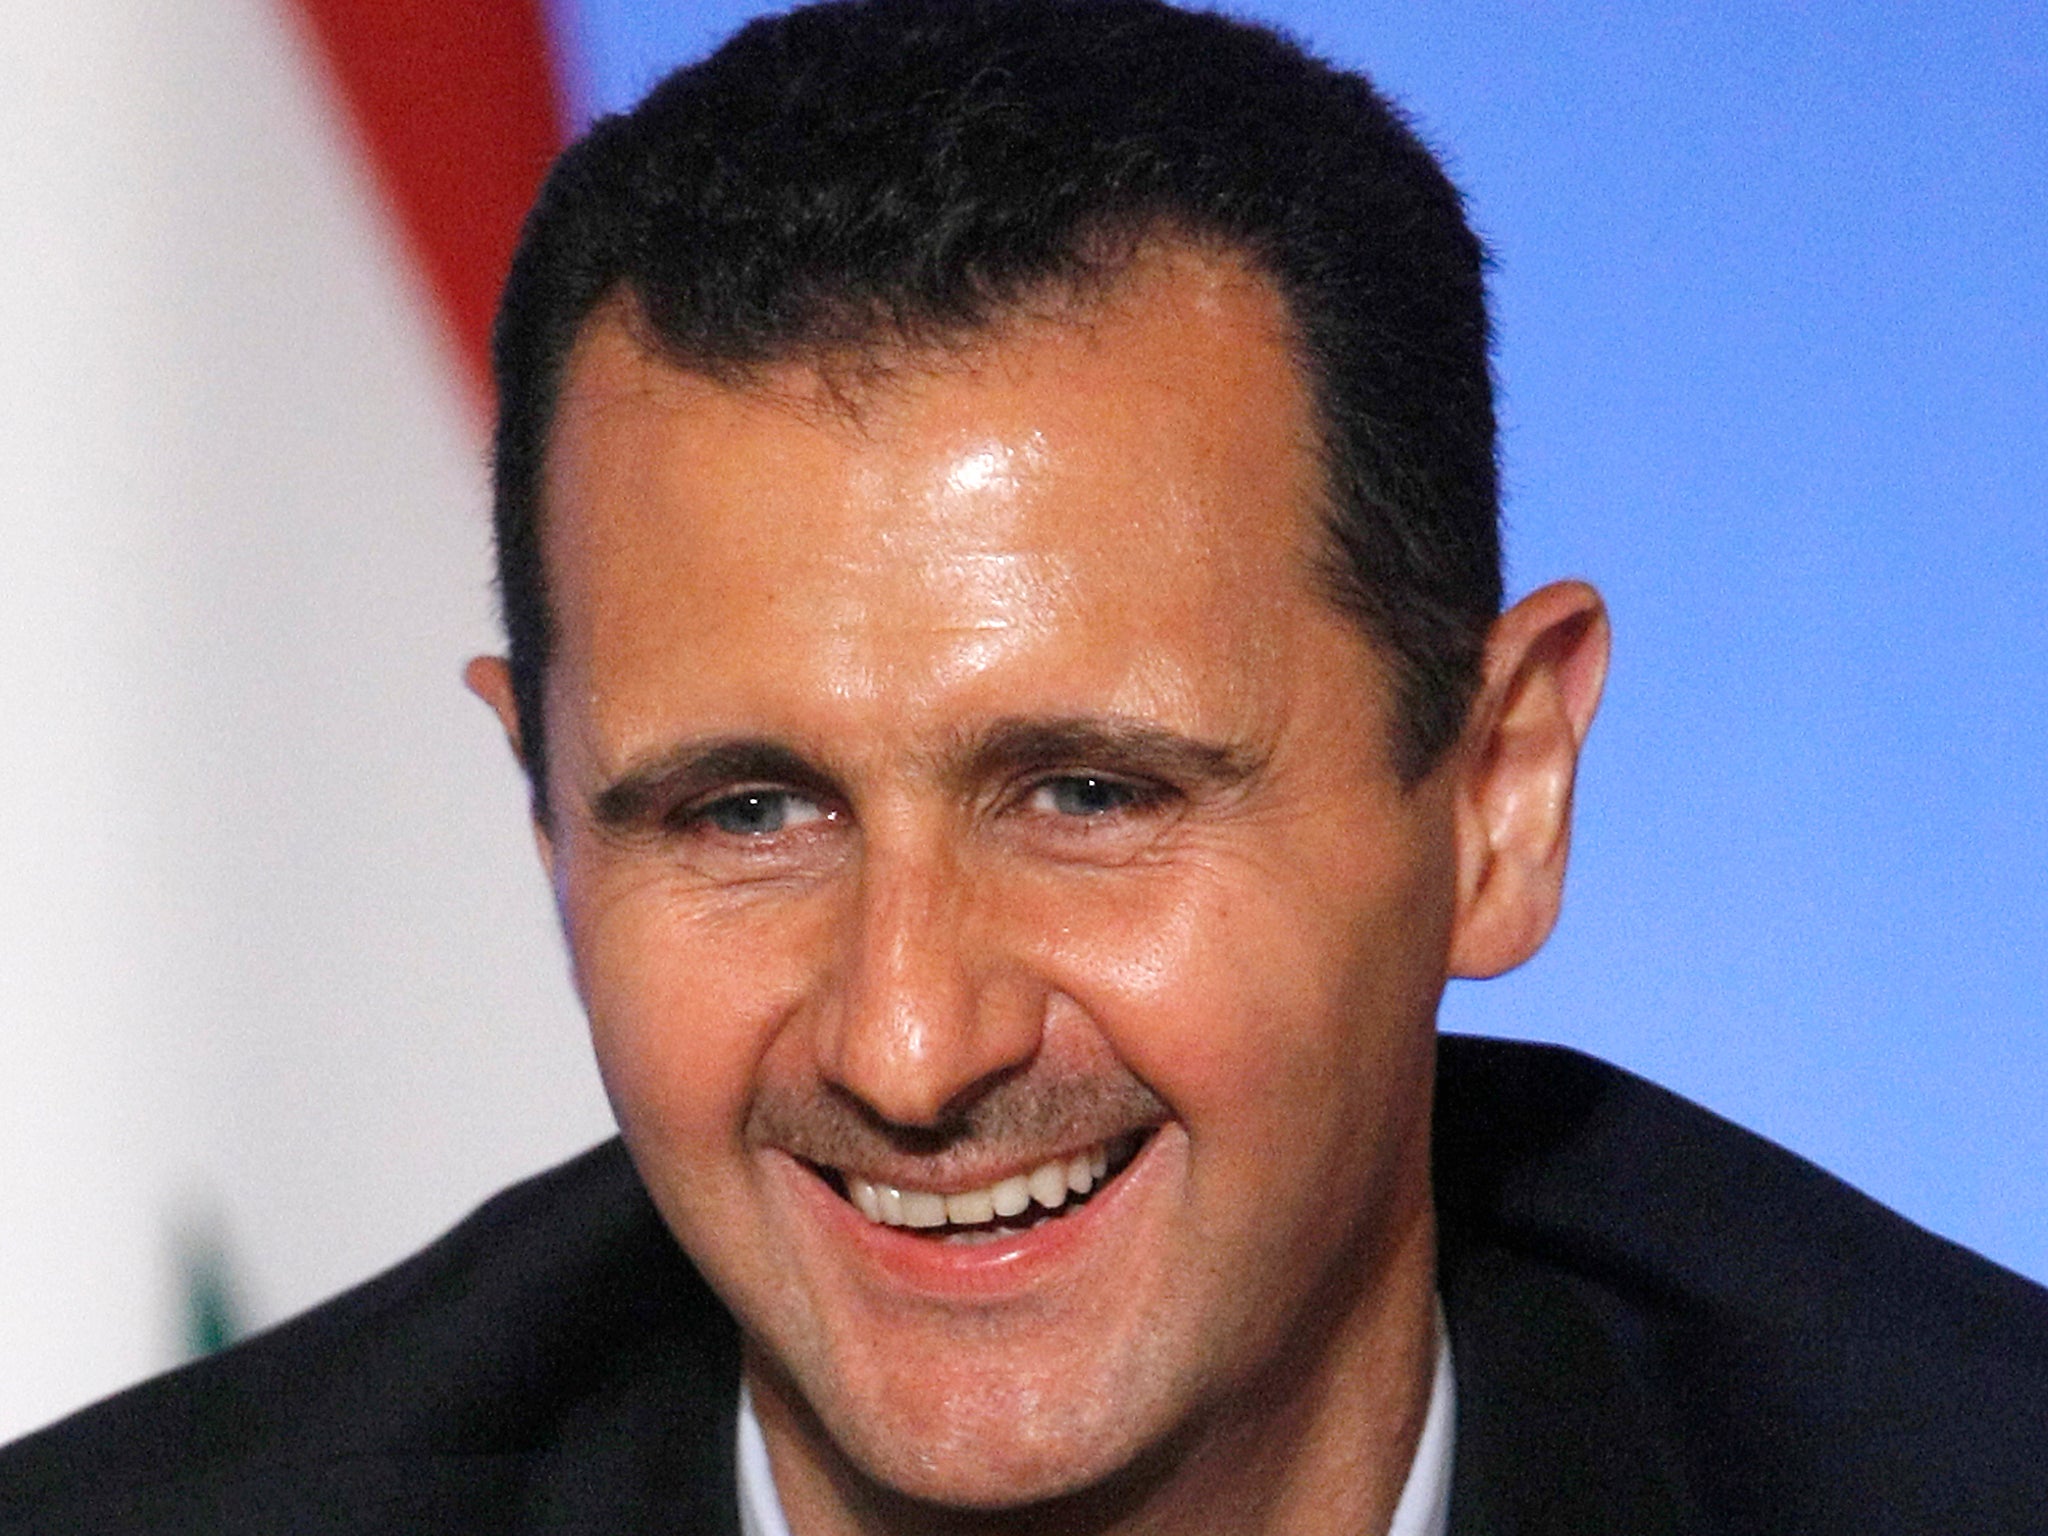 Syrian President Bashar al-Assad and his Iranian and Russian allies have welcomed the news Donald Trump will be the 45th President of the United States